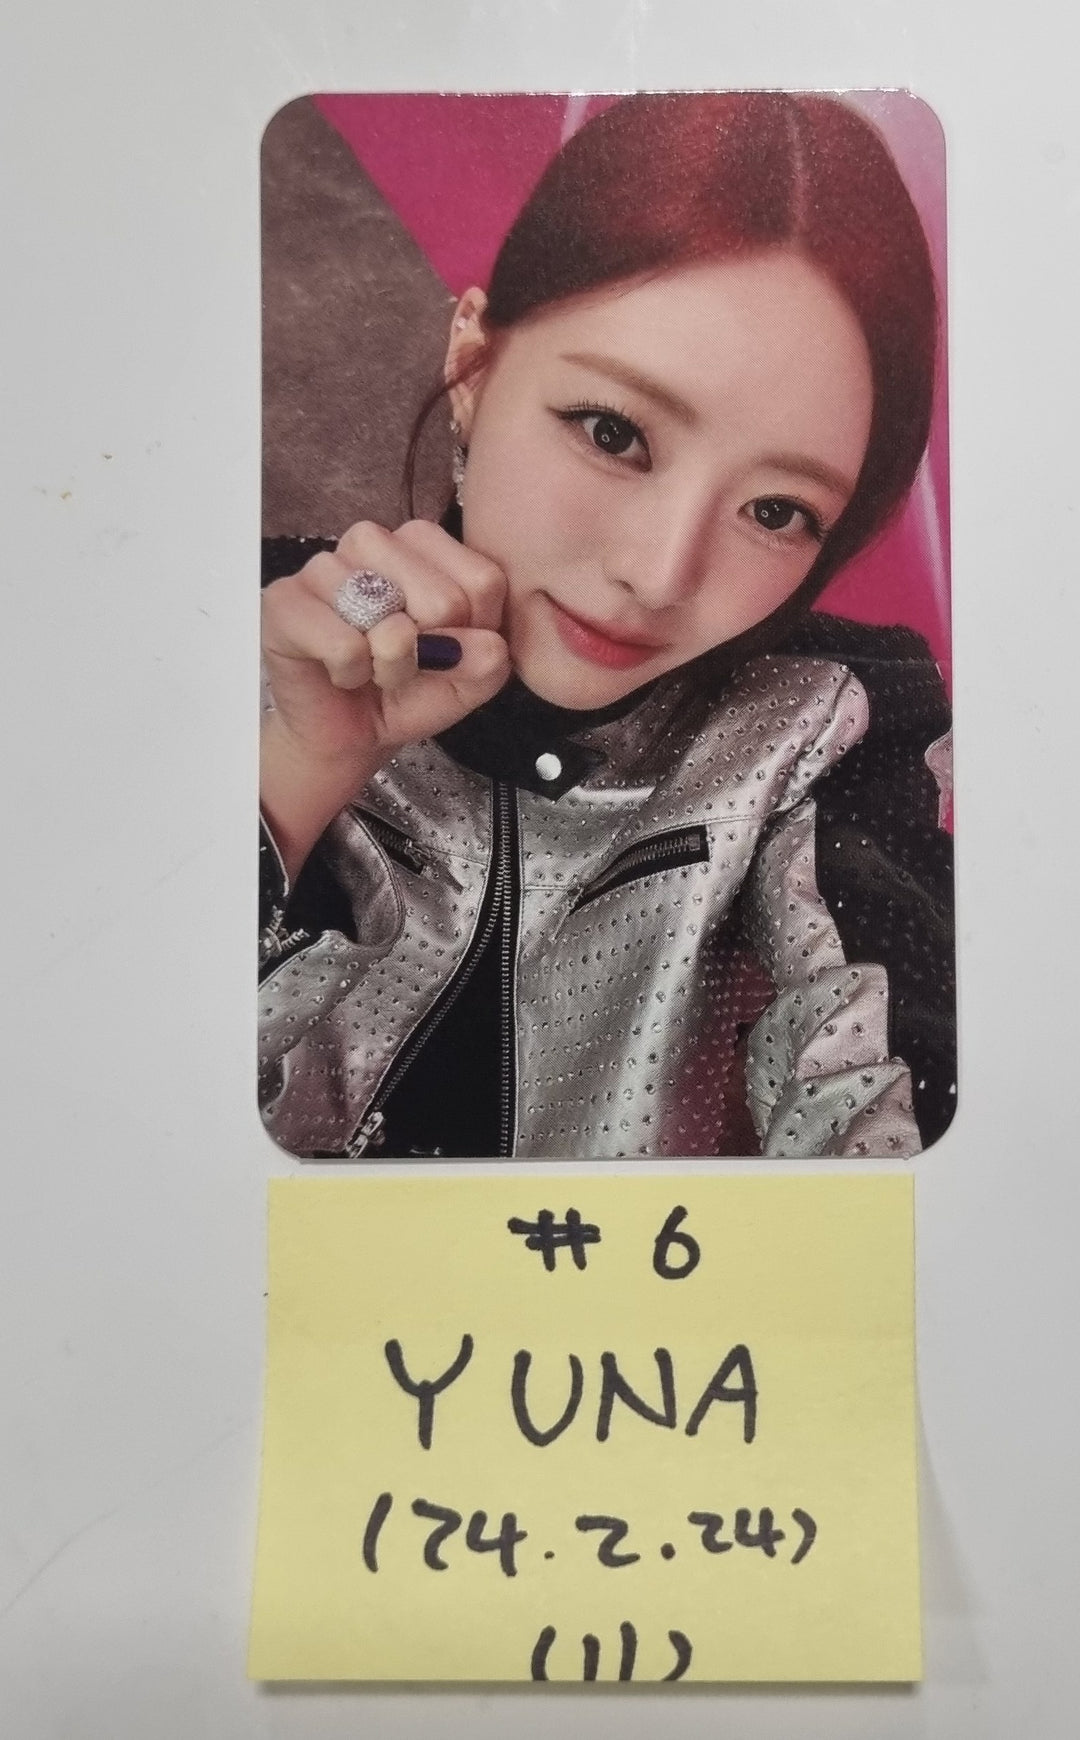 Itzy "BORN To BE" 2ND WORLD TOUR - Official Trading Photocard [24.2.24]